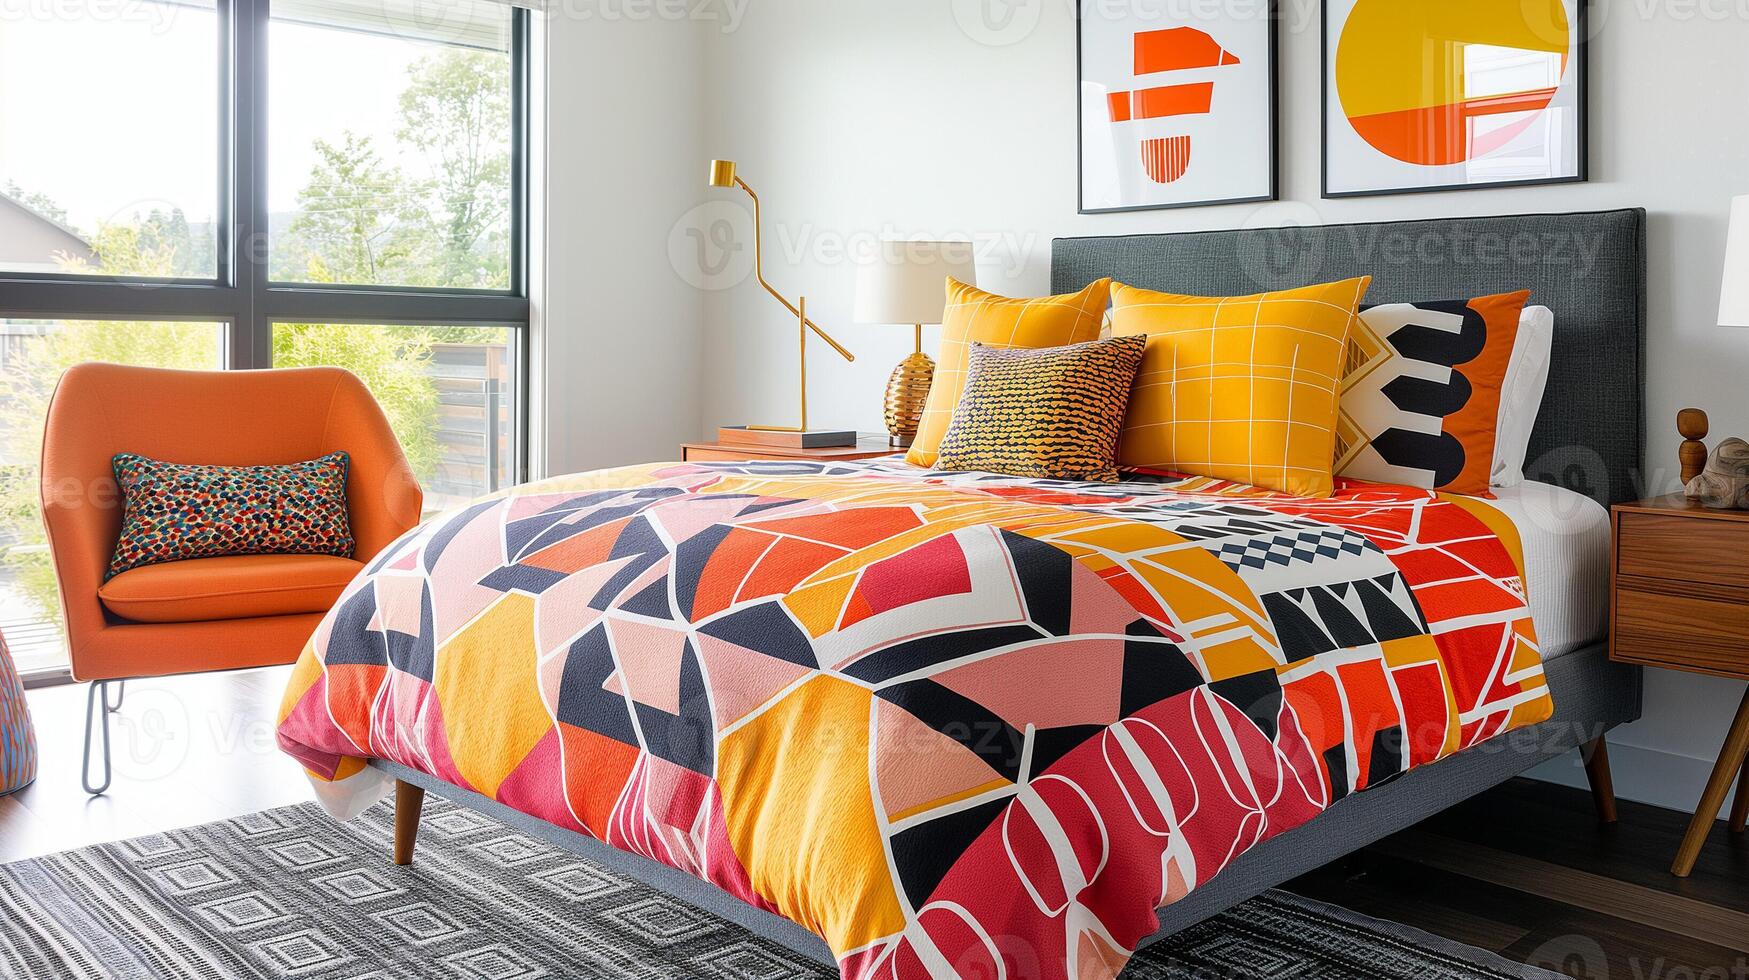 Bright modern bedroom interior with colorful geometric bedding, orange armchair, and contemporary art, embodying trendy home decor and spring refresh concepts photo